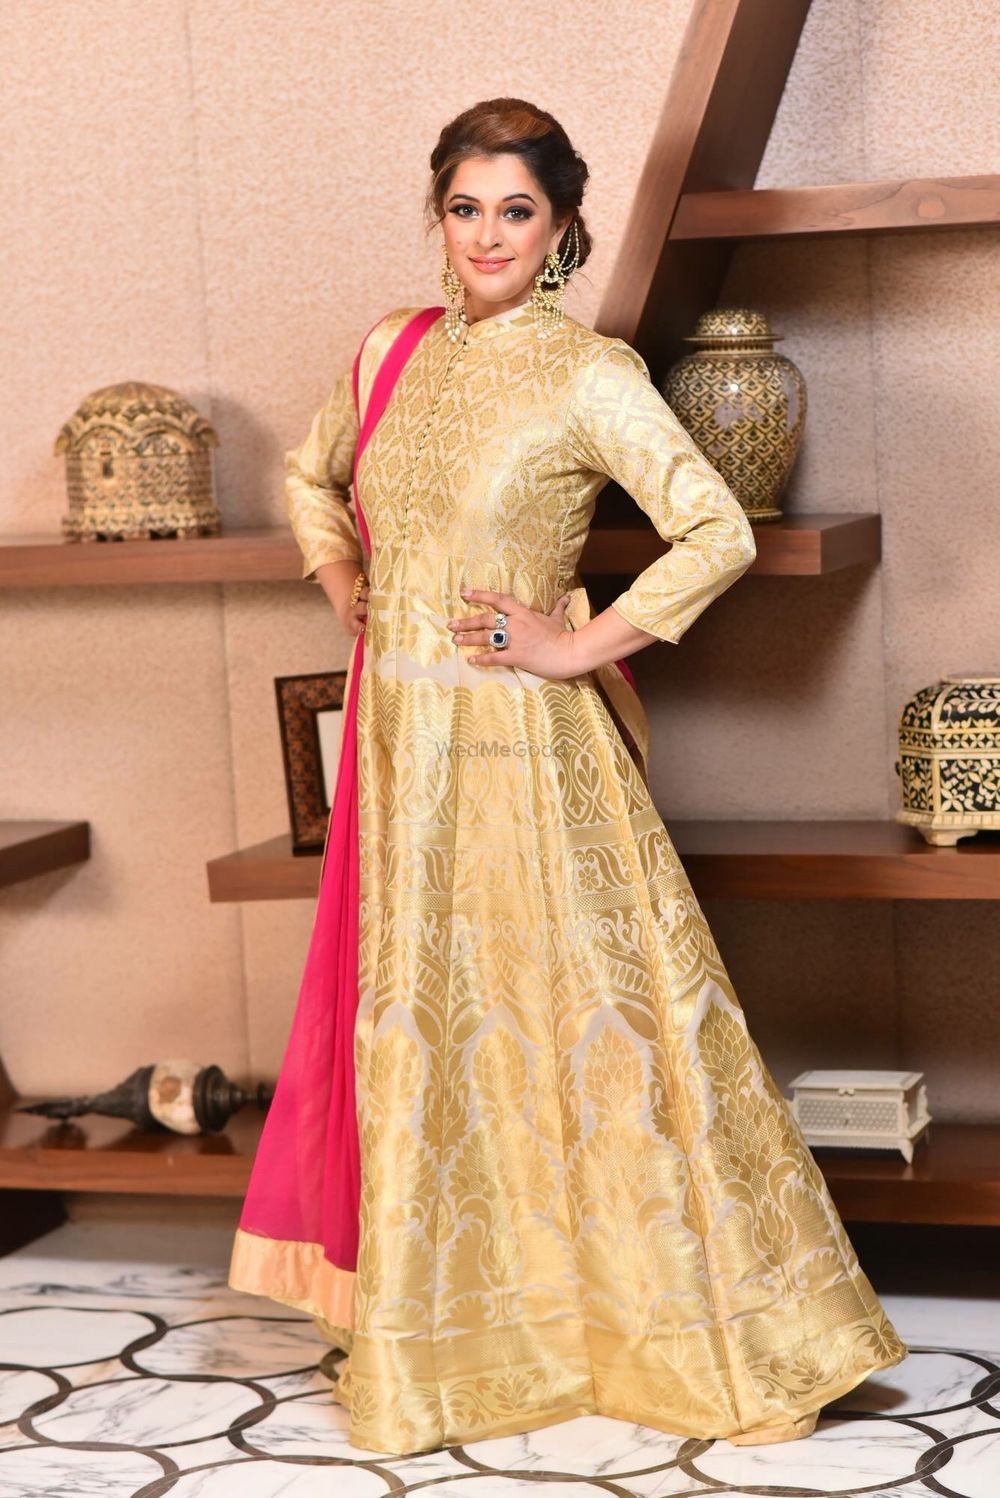 Photo of Gold and White High Neck Anarkali with Pink Dupatta